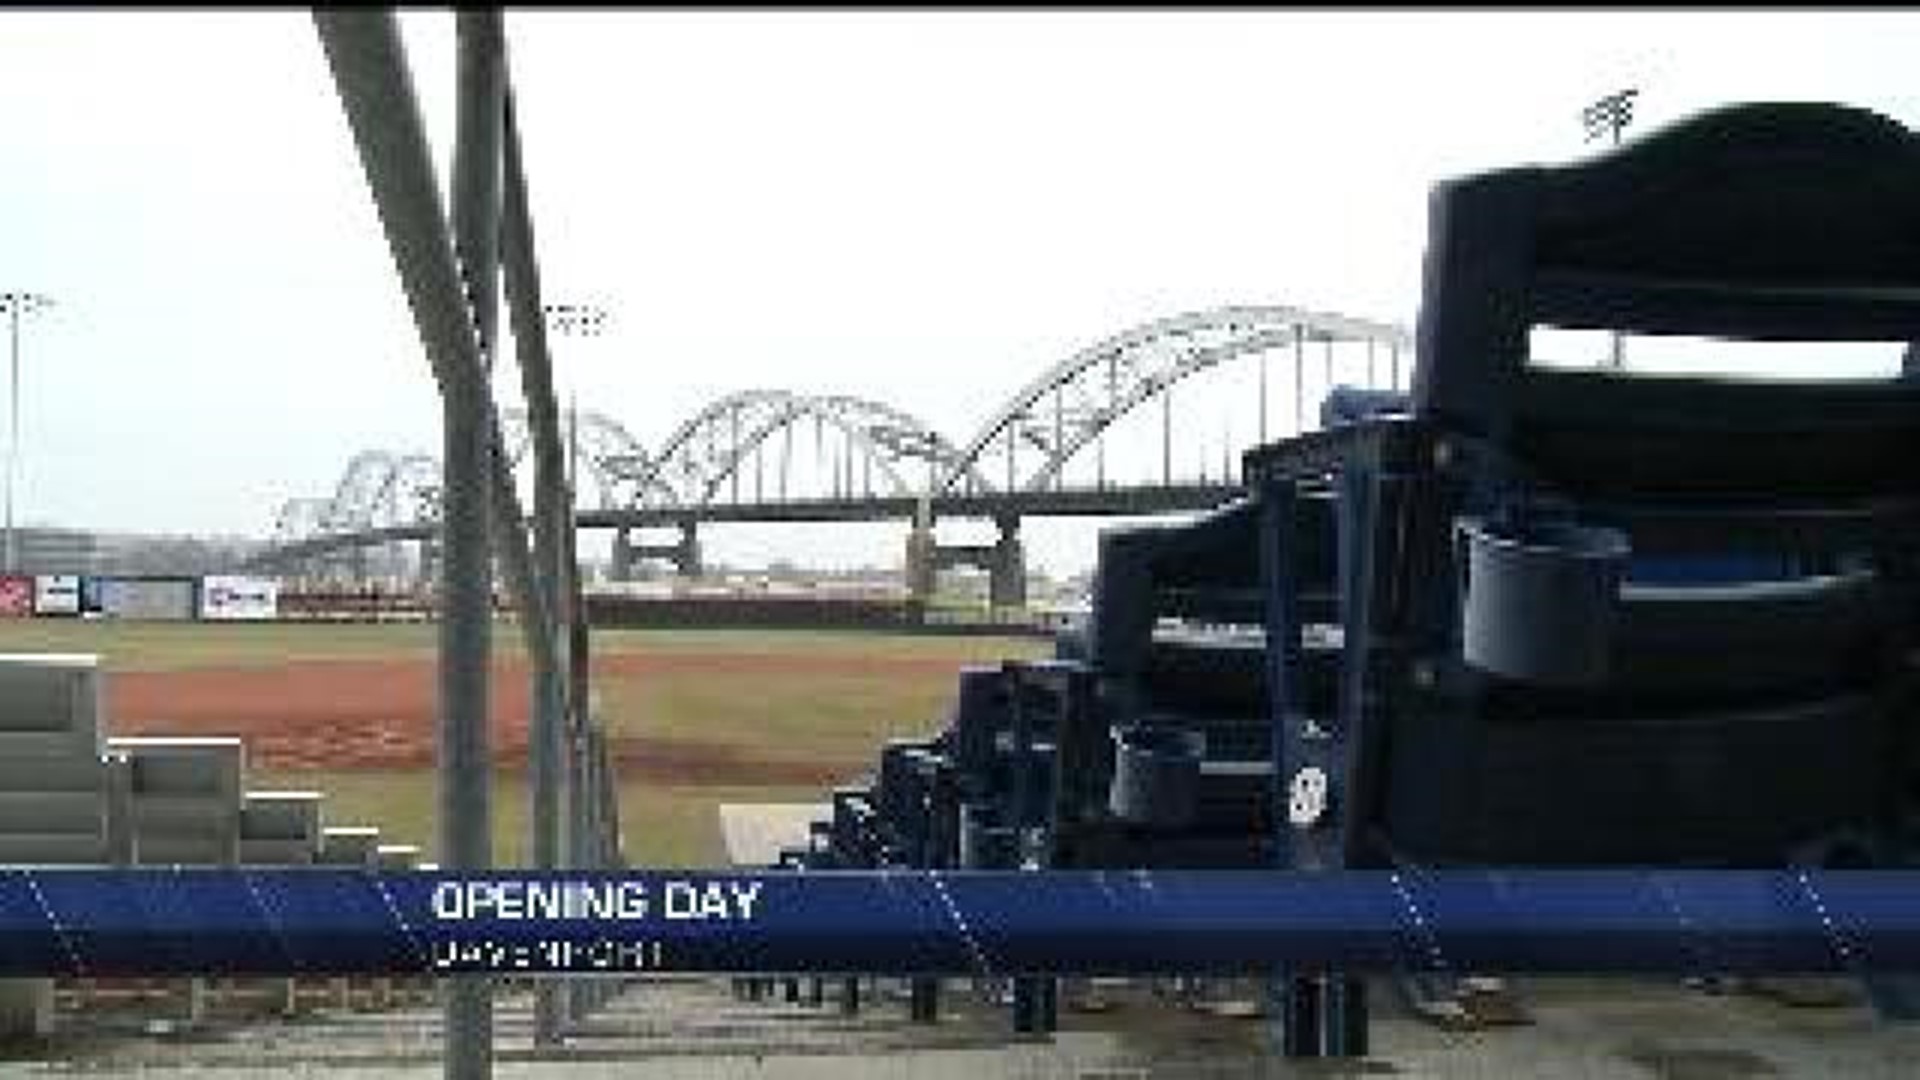 River Bandits Host Chilly Opening Day